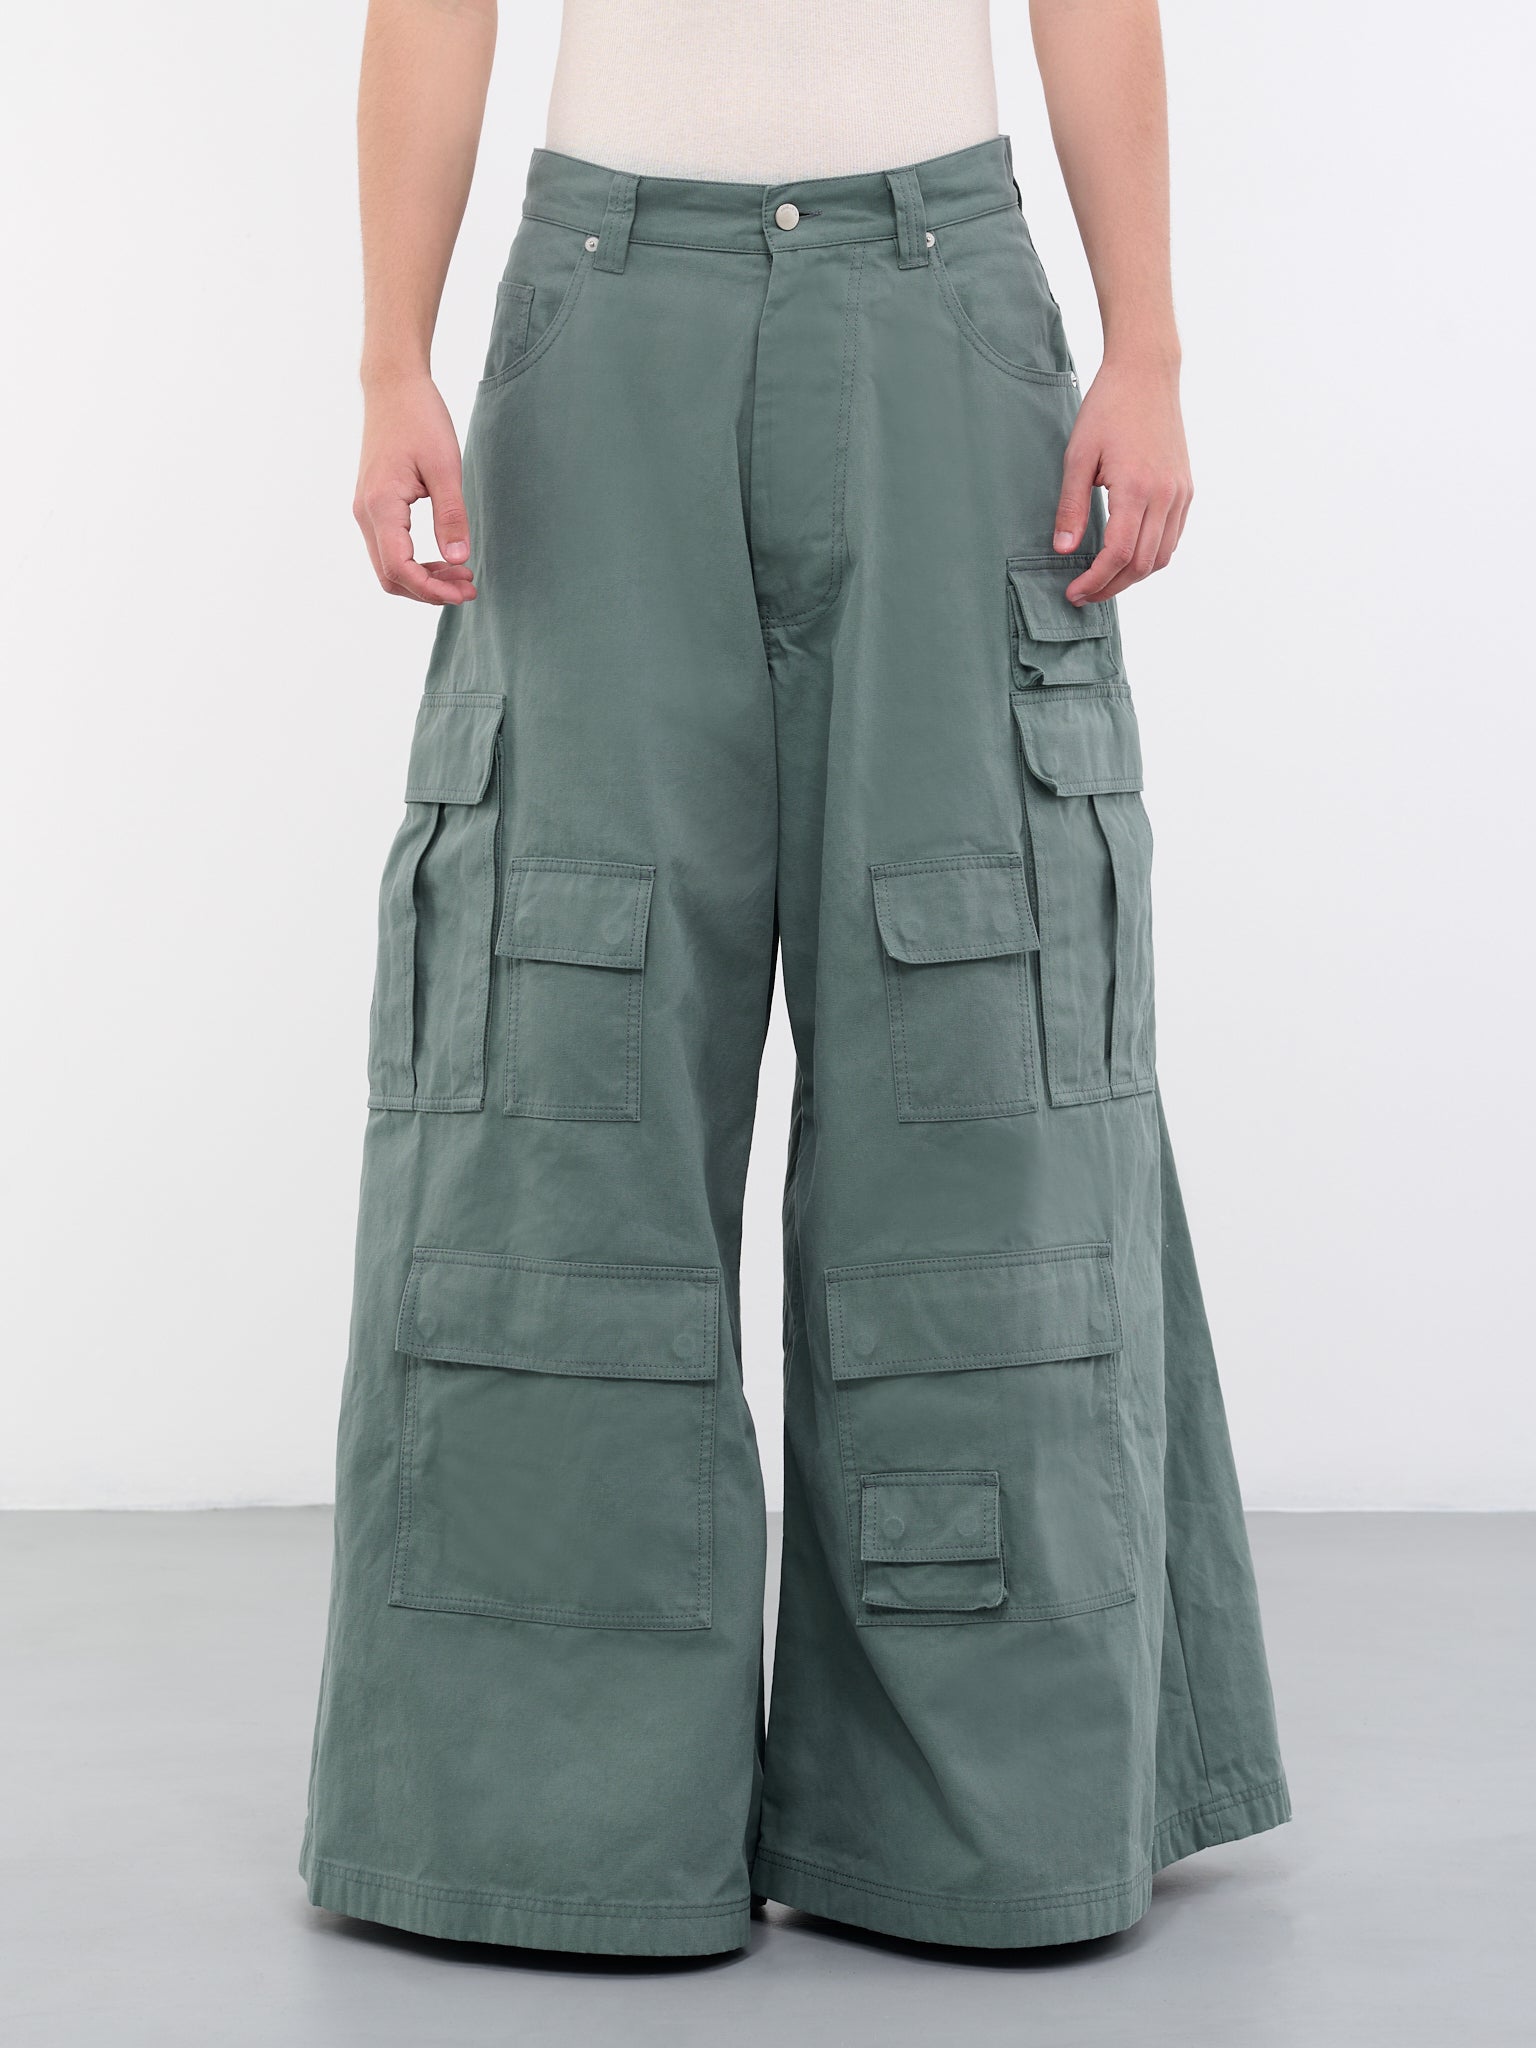 Mens Wide Leg Cargo Pants Relaxed Fit Lightweight India | Ubuy